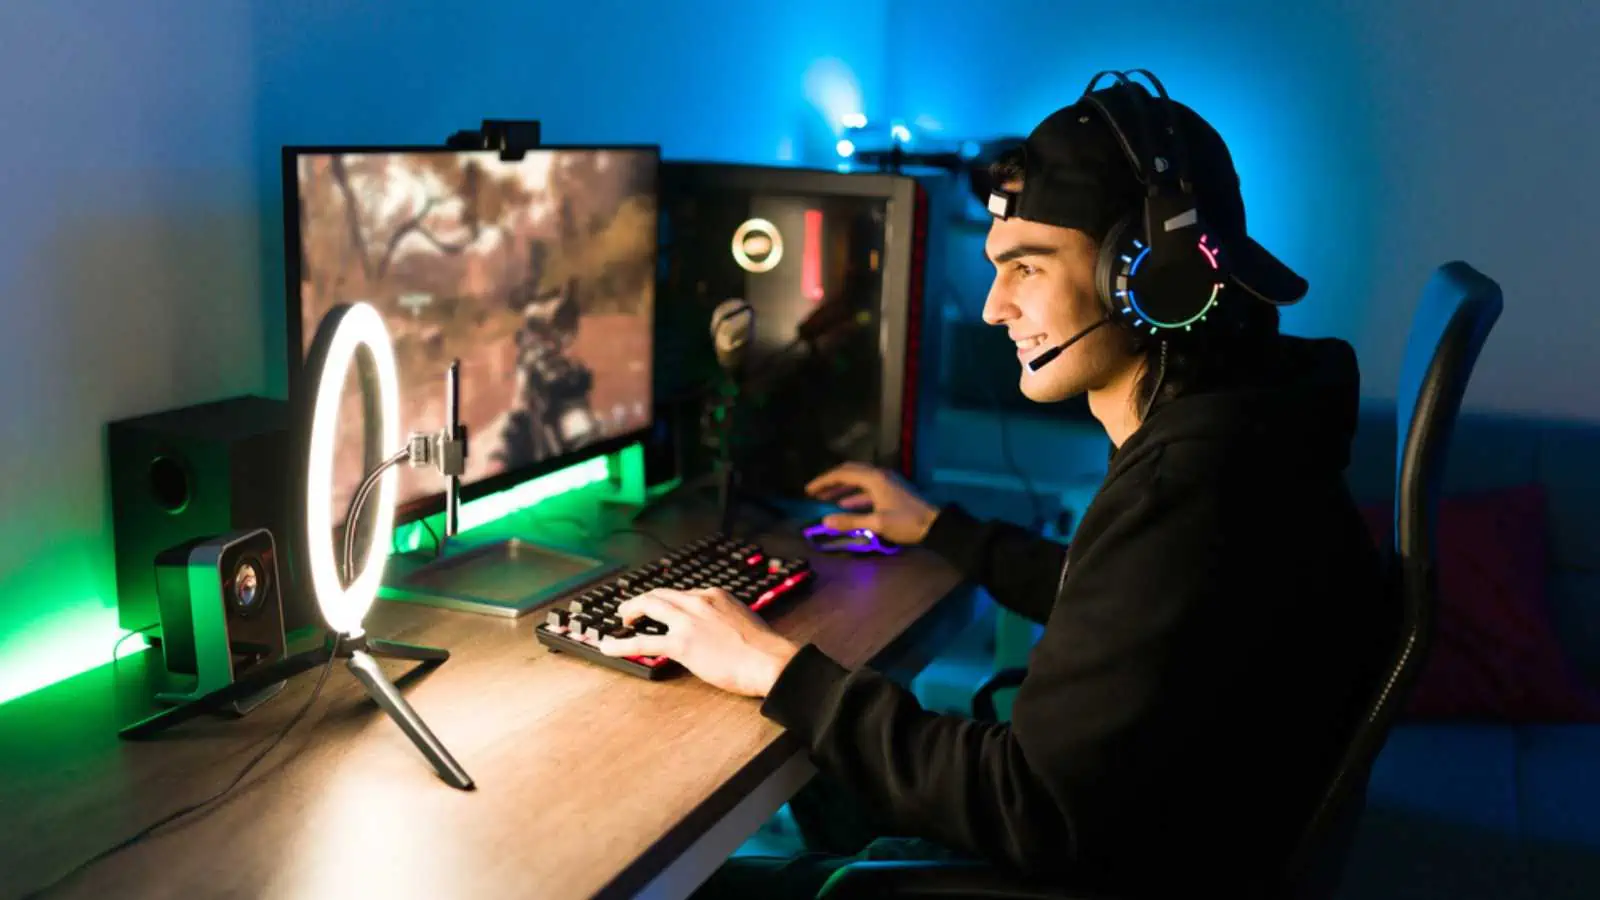 Smiling young man live streaming his online video game using a smartphone and a ring light. Happy gamer ready to start playing in a gaming computer